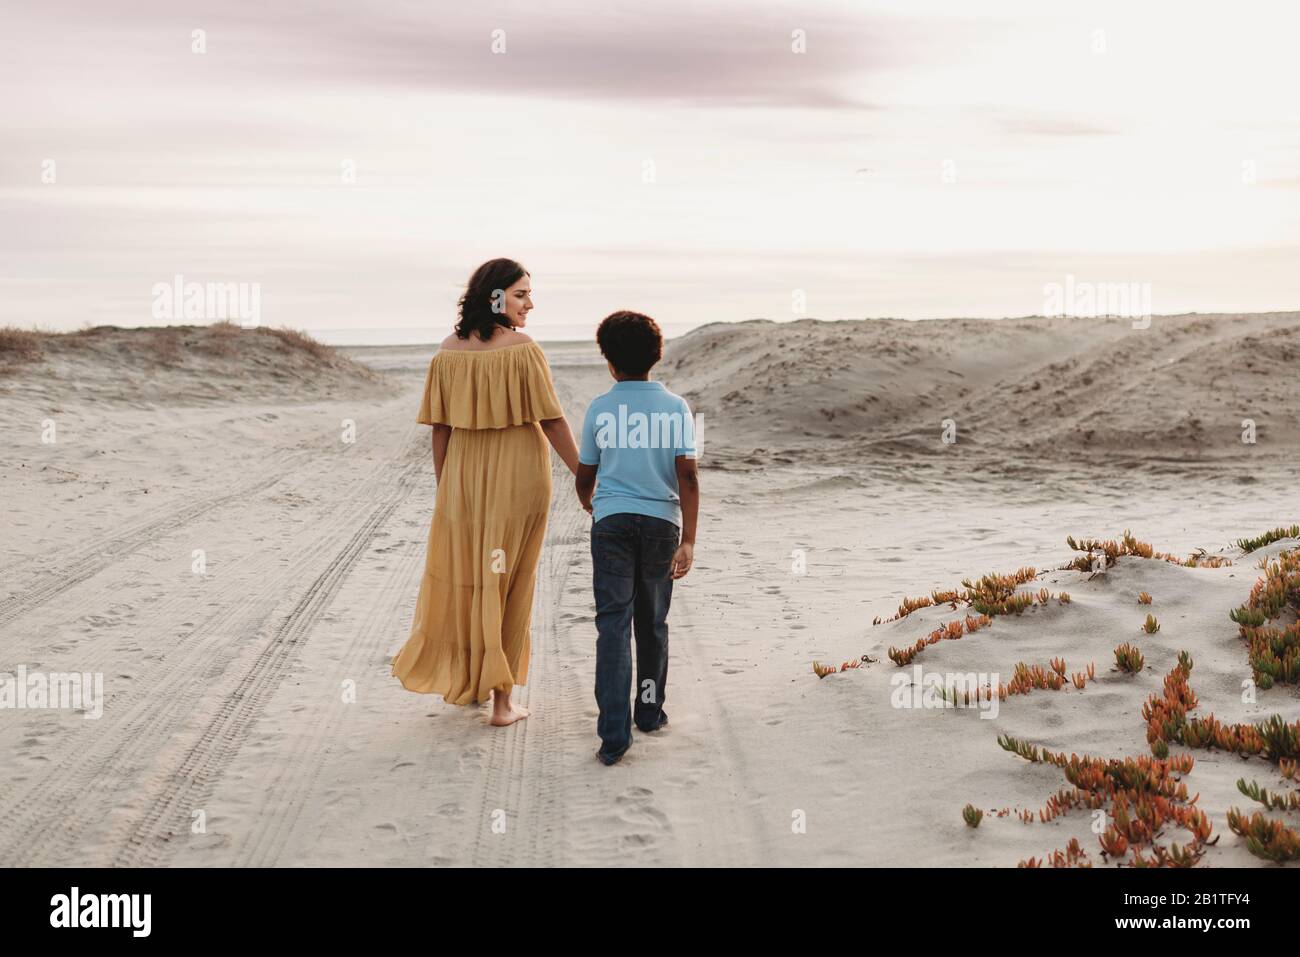 young-mother-and-school-aged-son-walking-at-beach-against-cloudy-sky-2B1TFY4.jpg